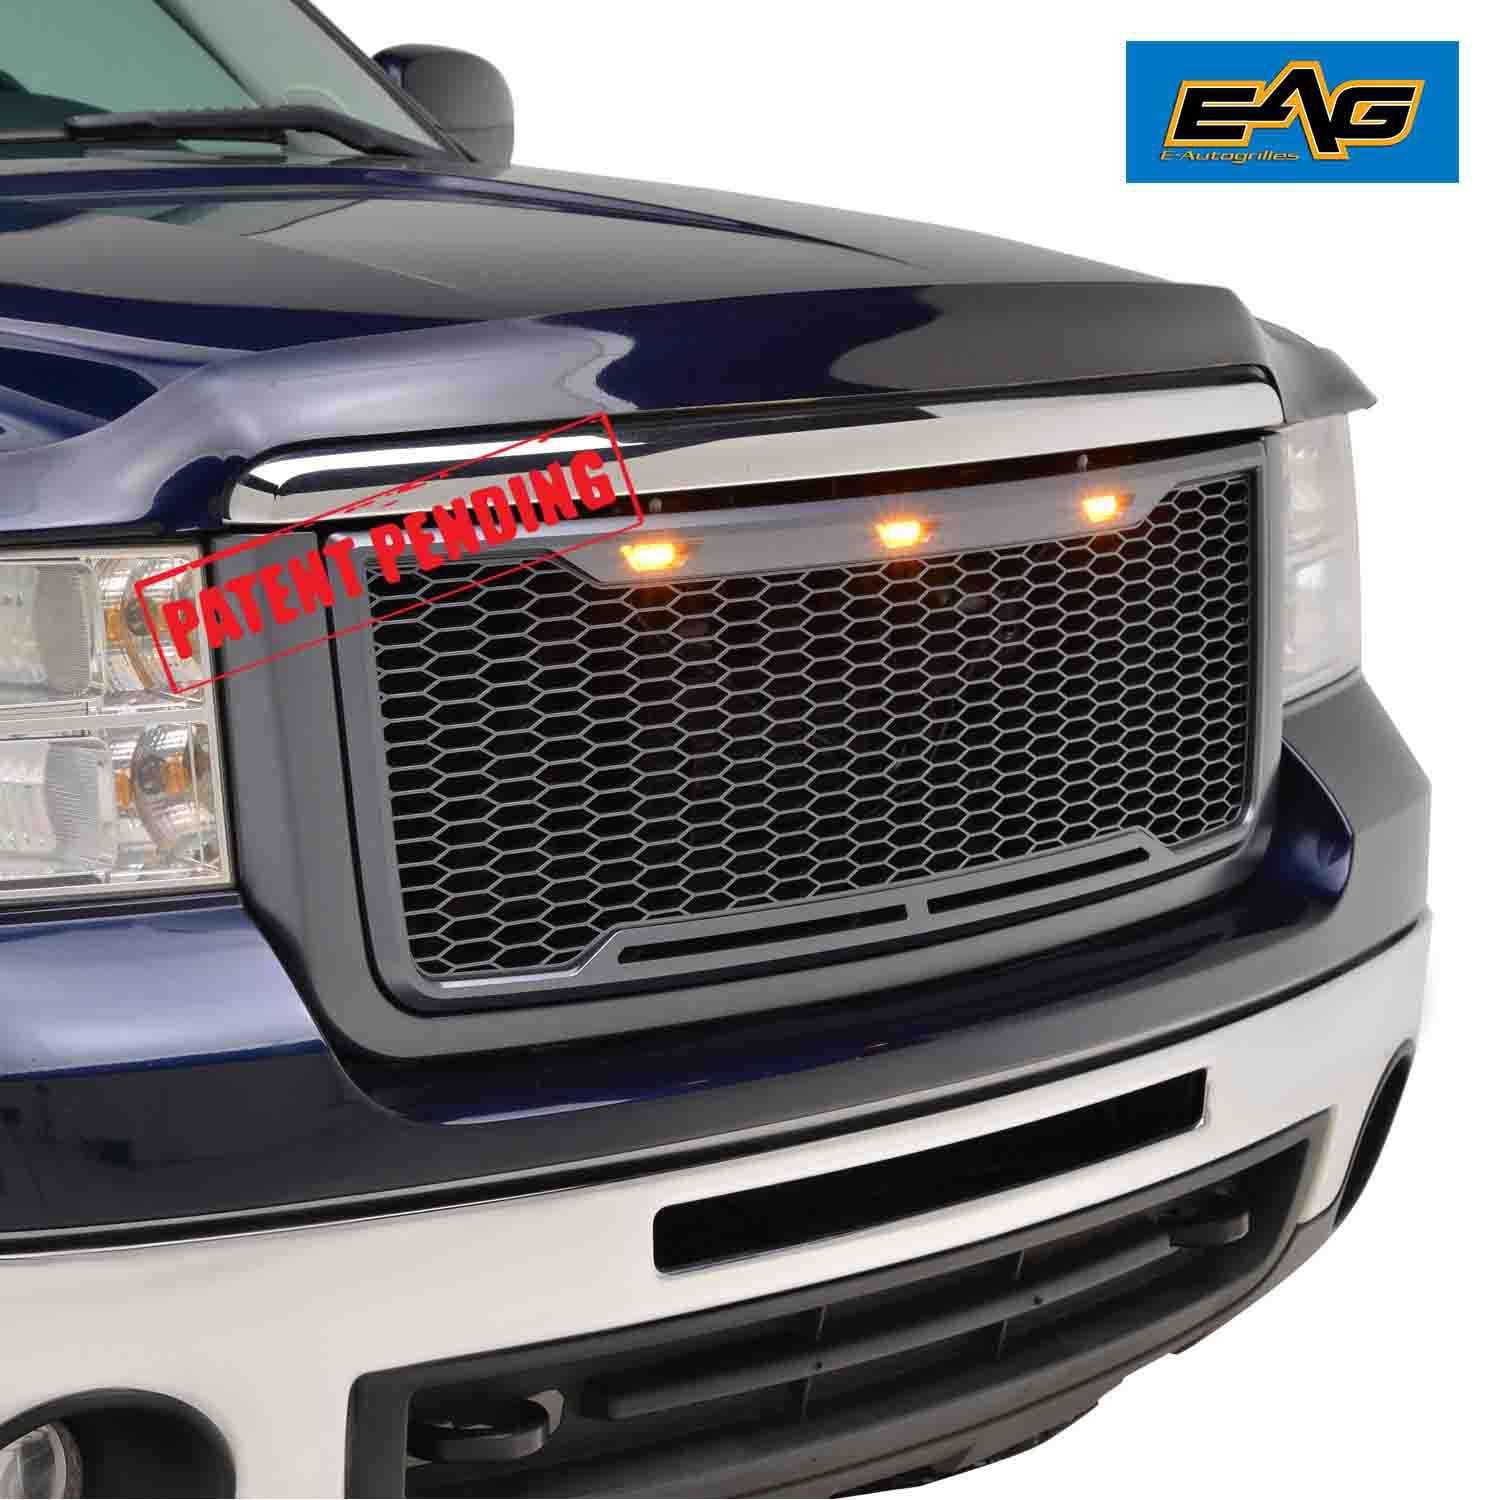 Matte Black for 07-10 GMC Sierra 2500/3500 Heavy Duty EAG Replacement Sierra Upper Grille Front Mesh Grill With Amber LED Lights 